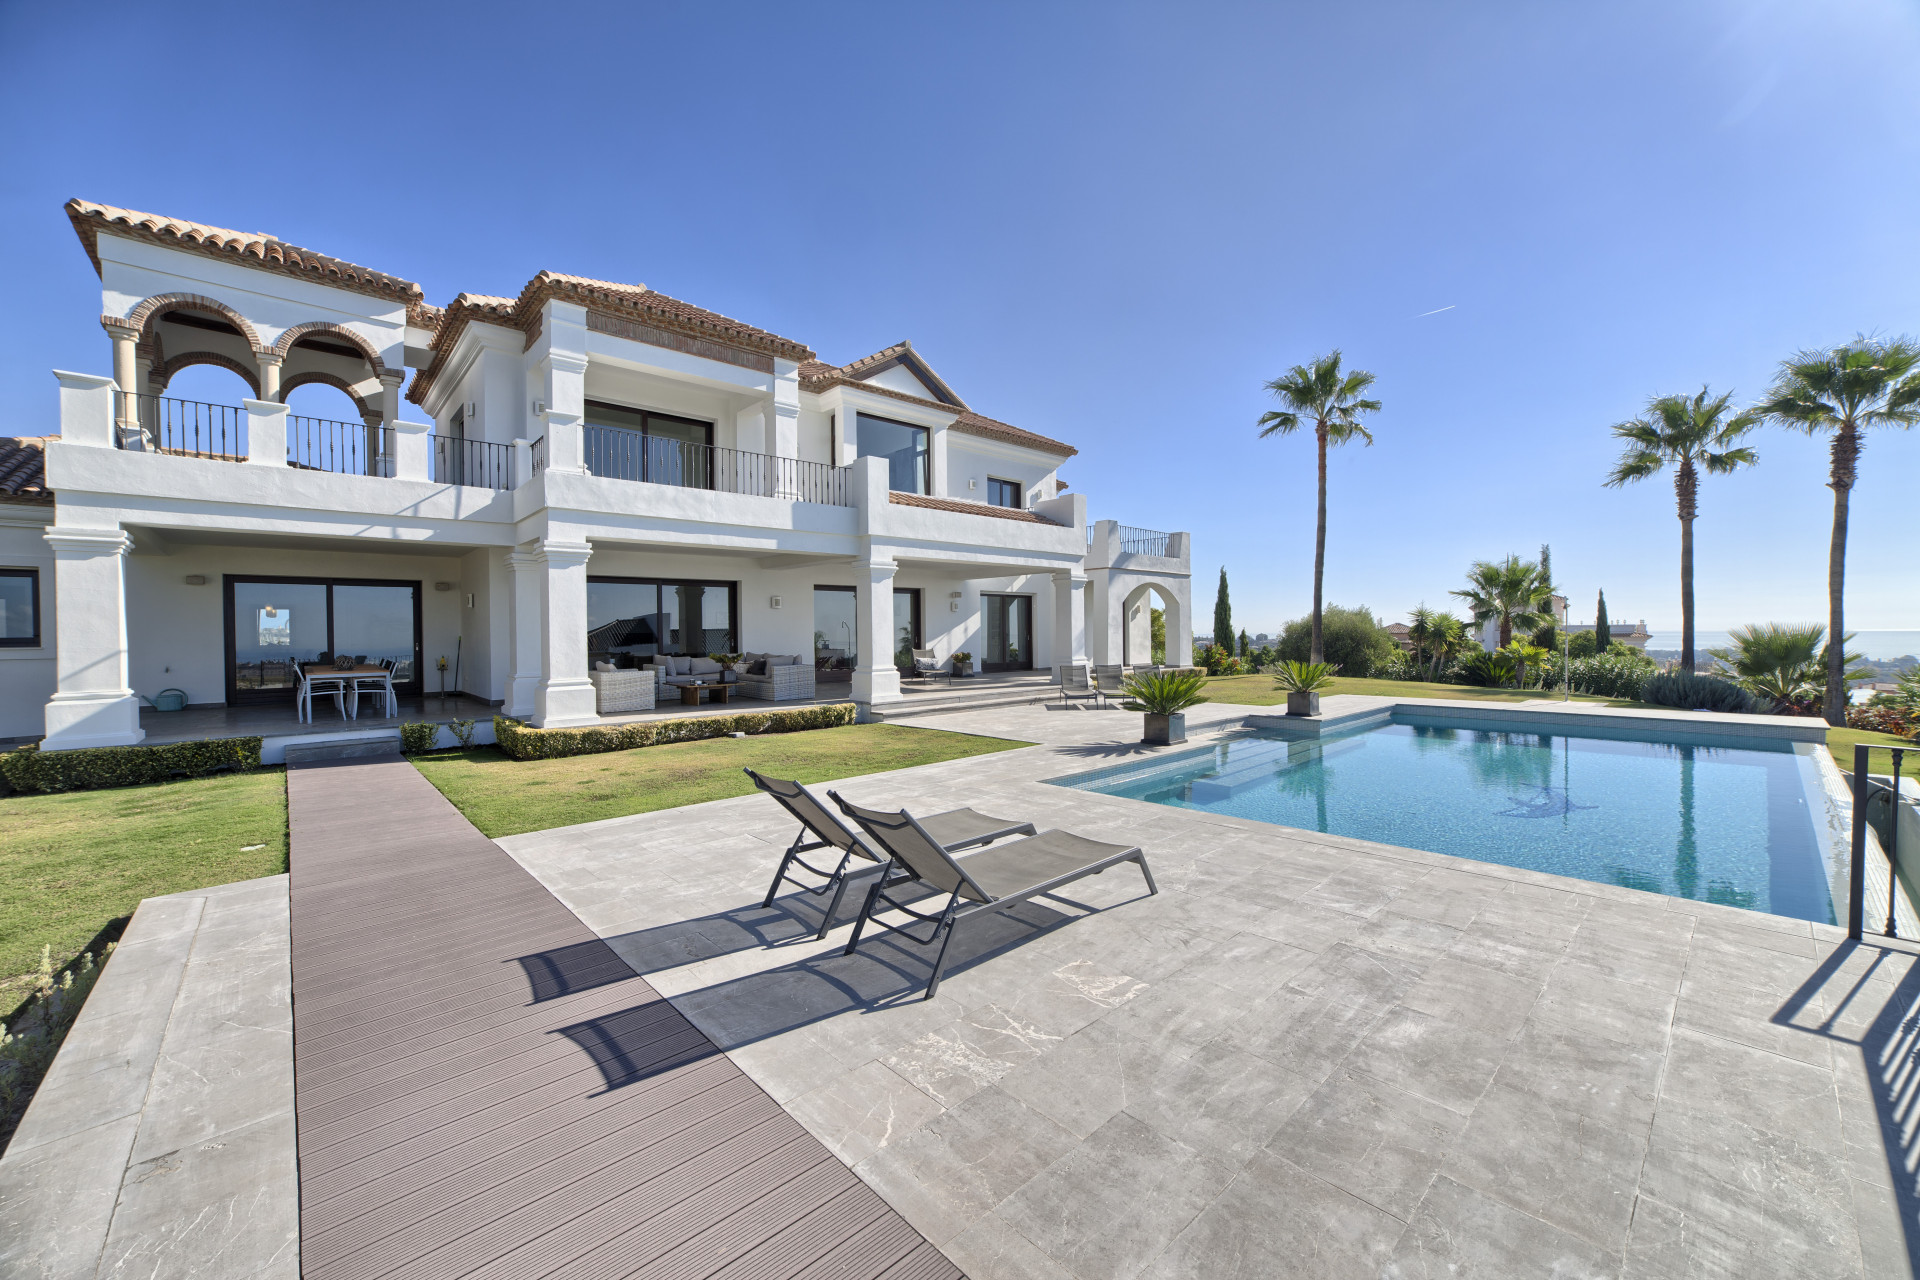 Top quality villa built to the highest standards situated in Los Flamingos Golf Resort, Benahavís.